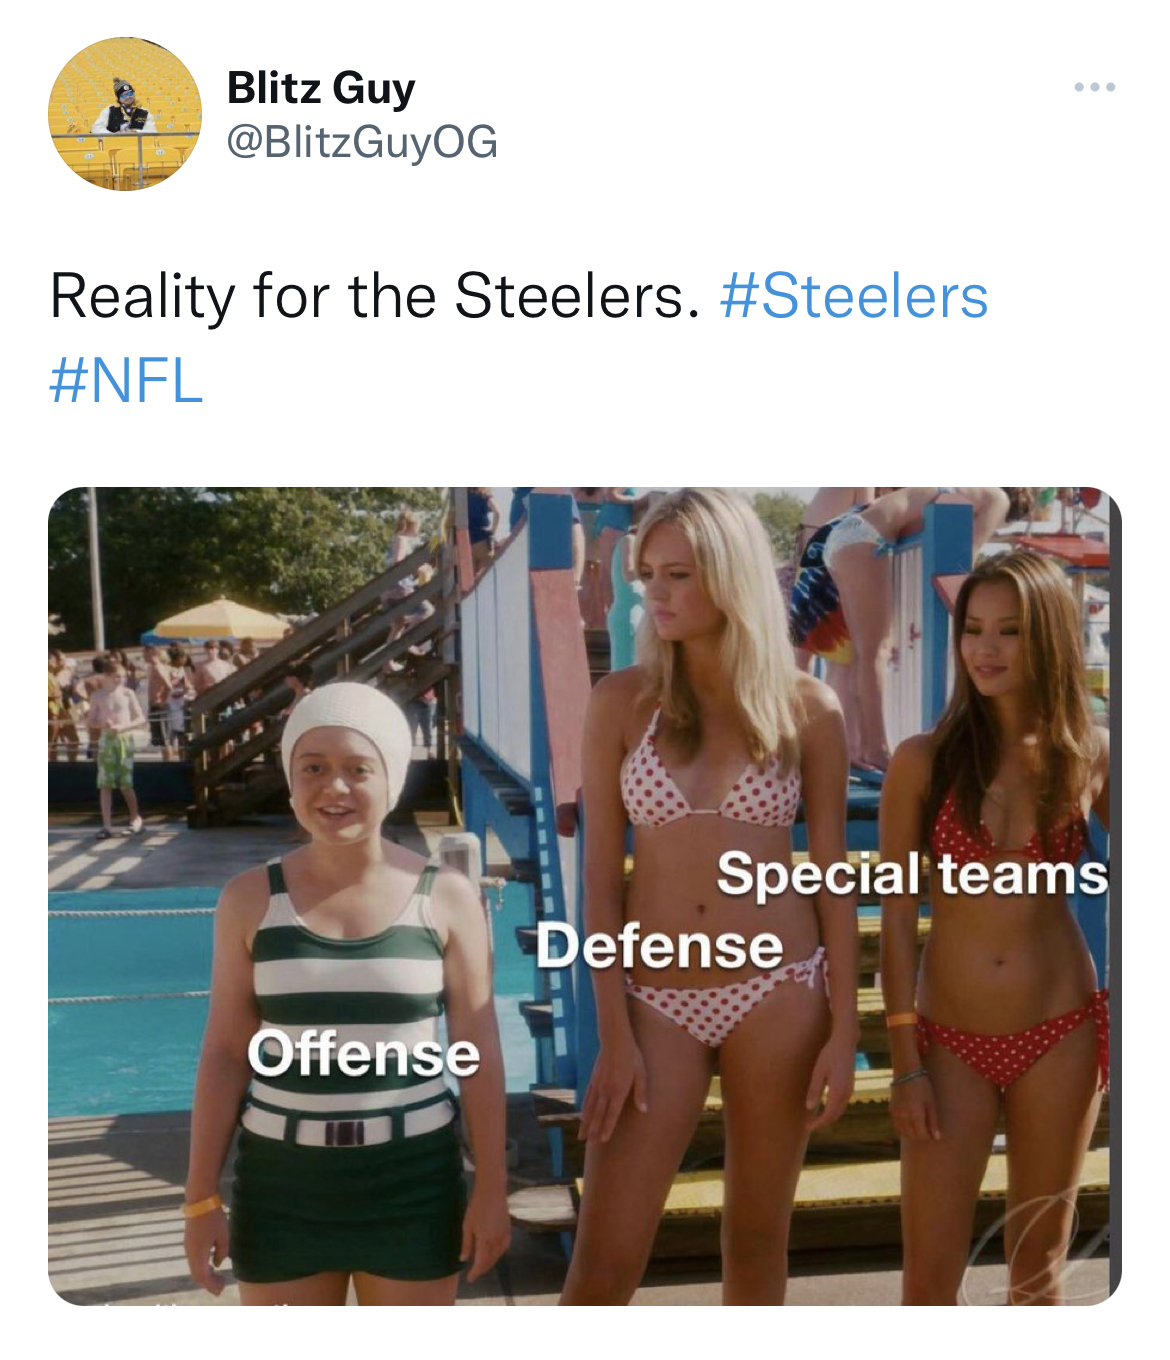 salty and savage nfl memes - me on love island meme - Blitz Guy Reality for the Steelers. Offense Special teams Defense